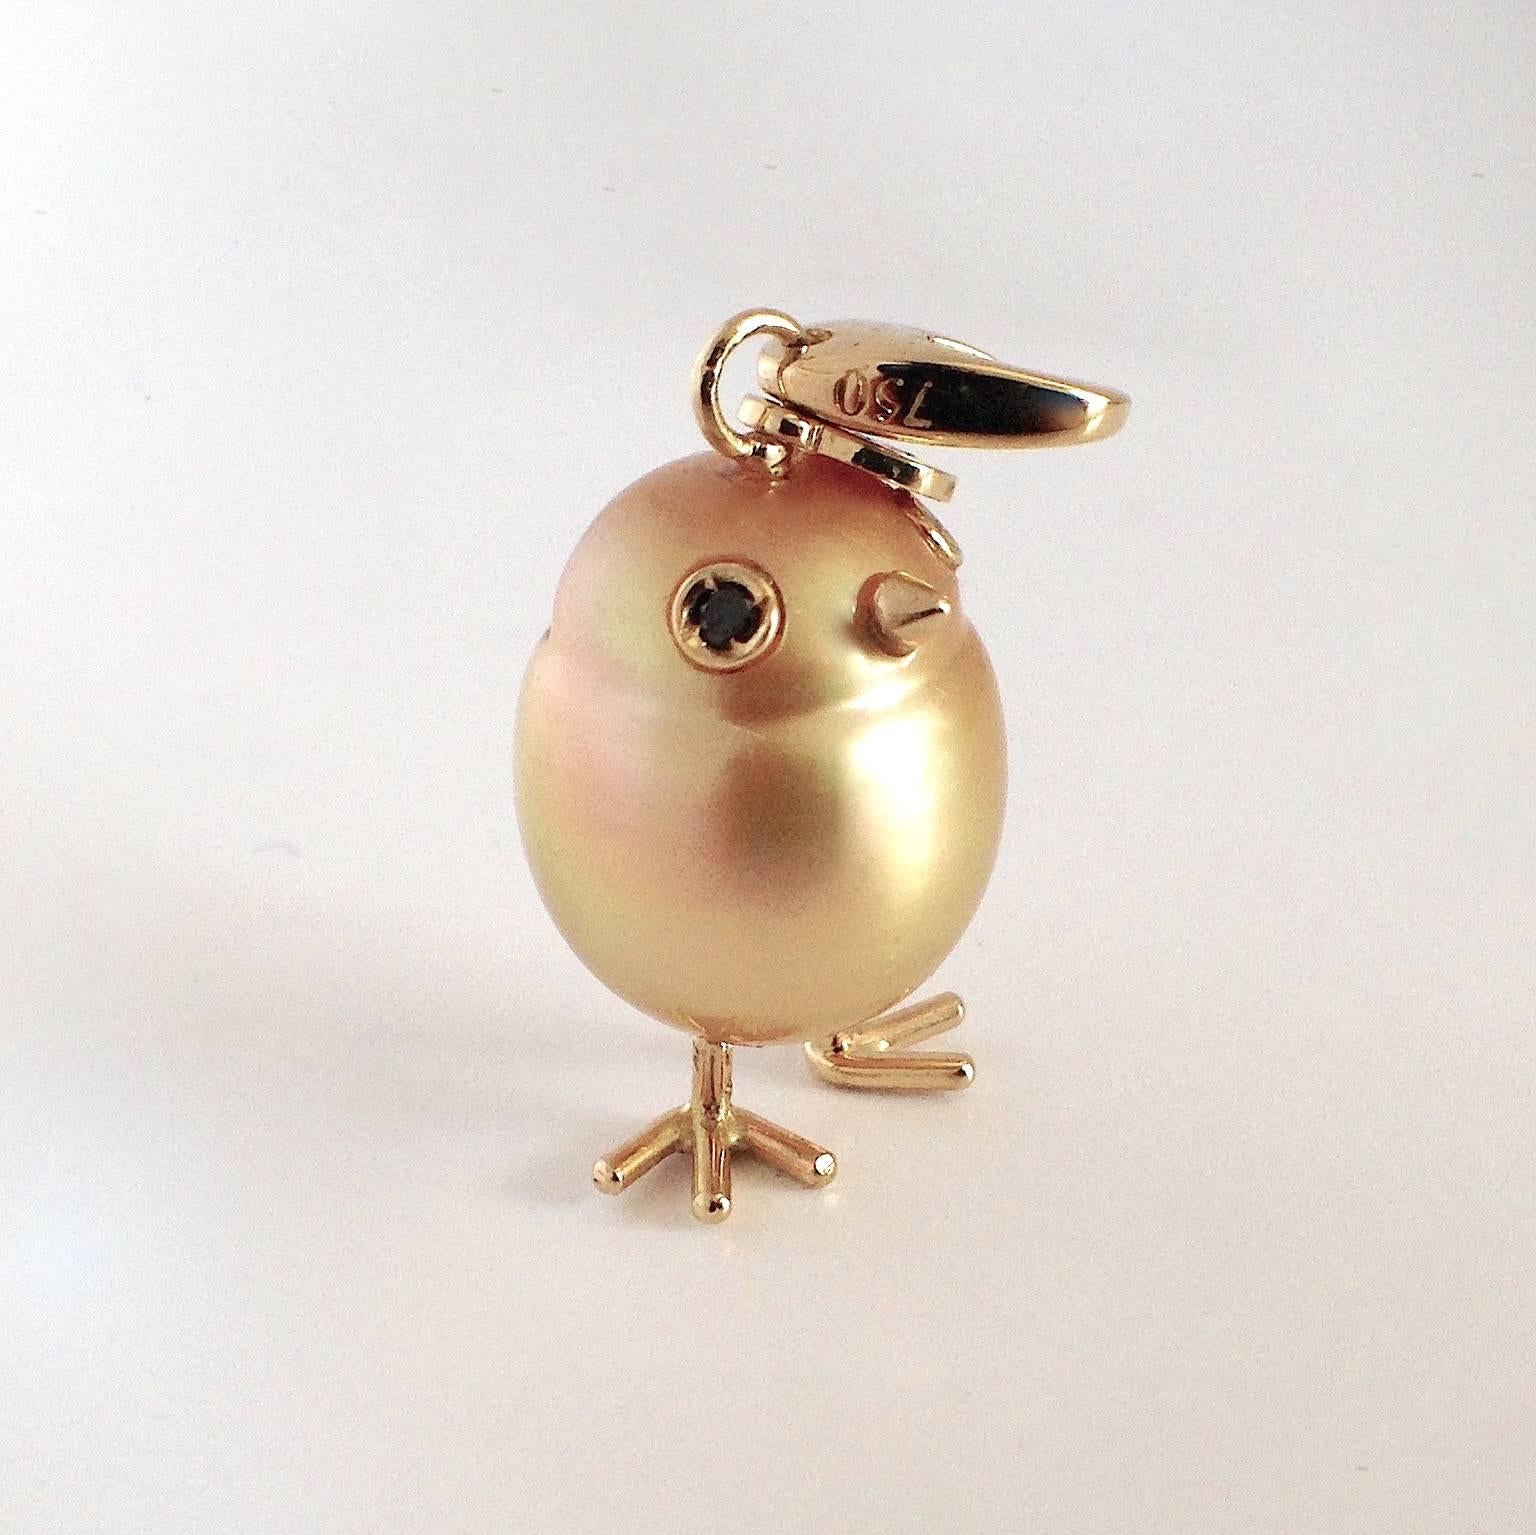 A yellow Australian pearl has been carefully crafted to make a chick. He has his two legs, two eyes encrusted with two black diamonds and his golden beak. The ring for the necklace is a carabiner so it can be worn also as a beautiful charm on a